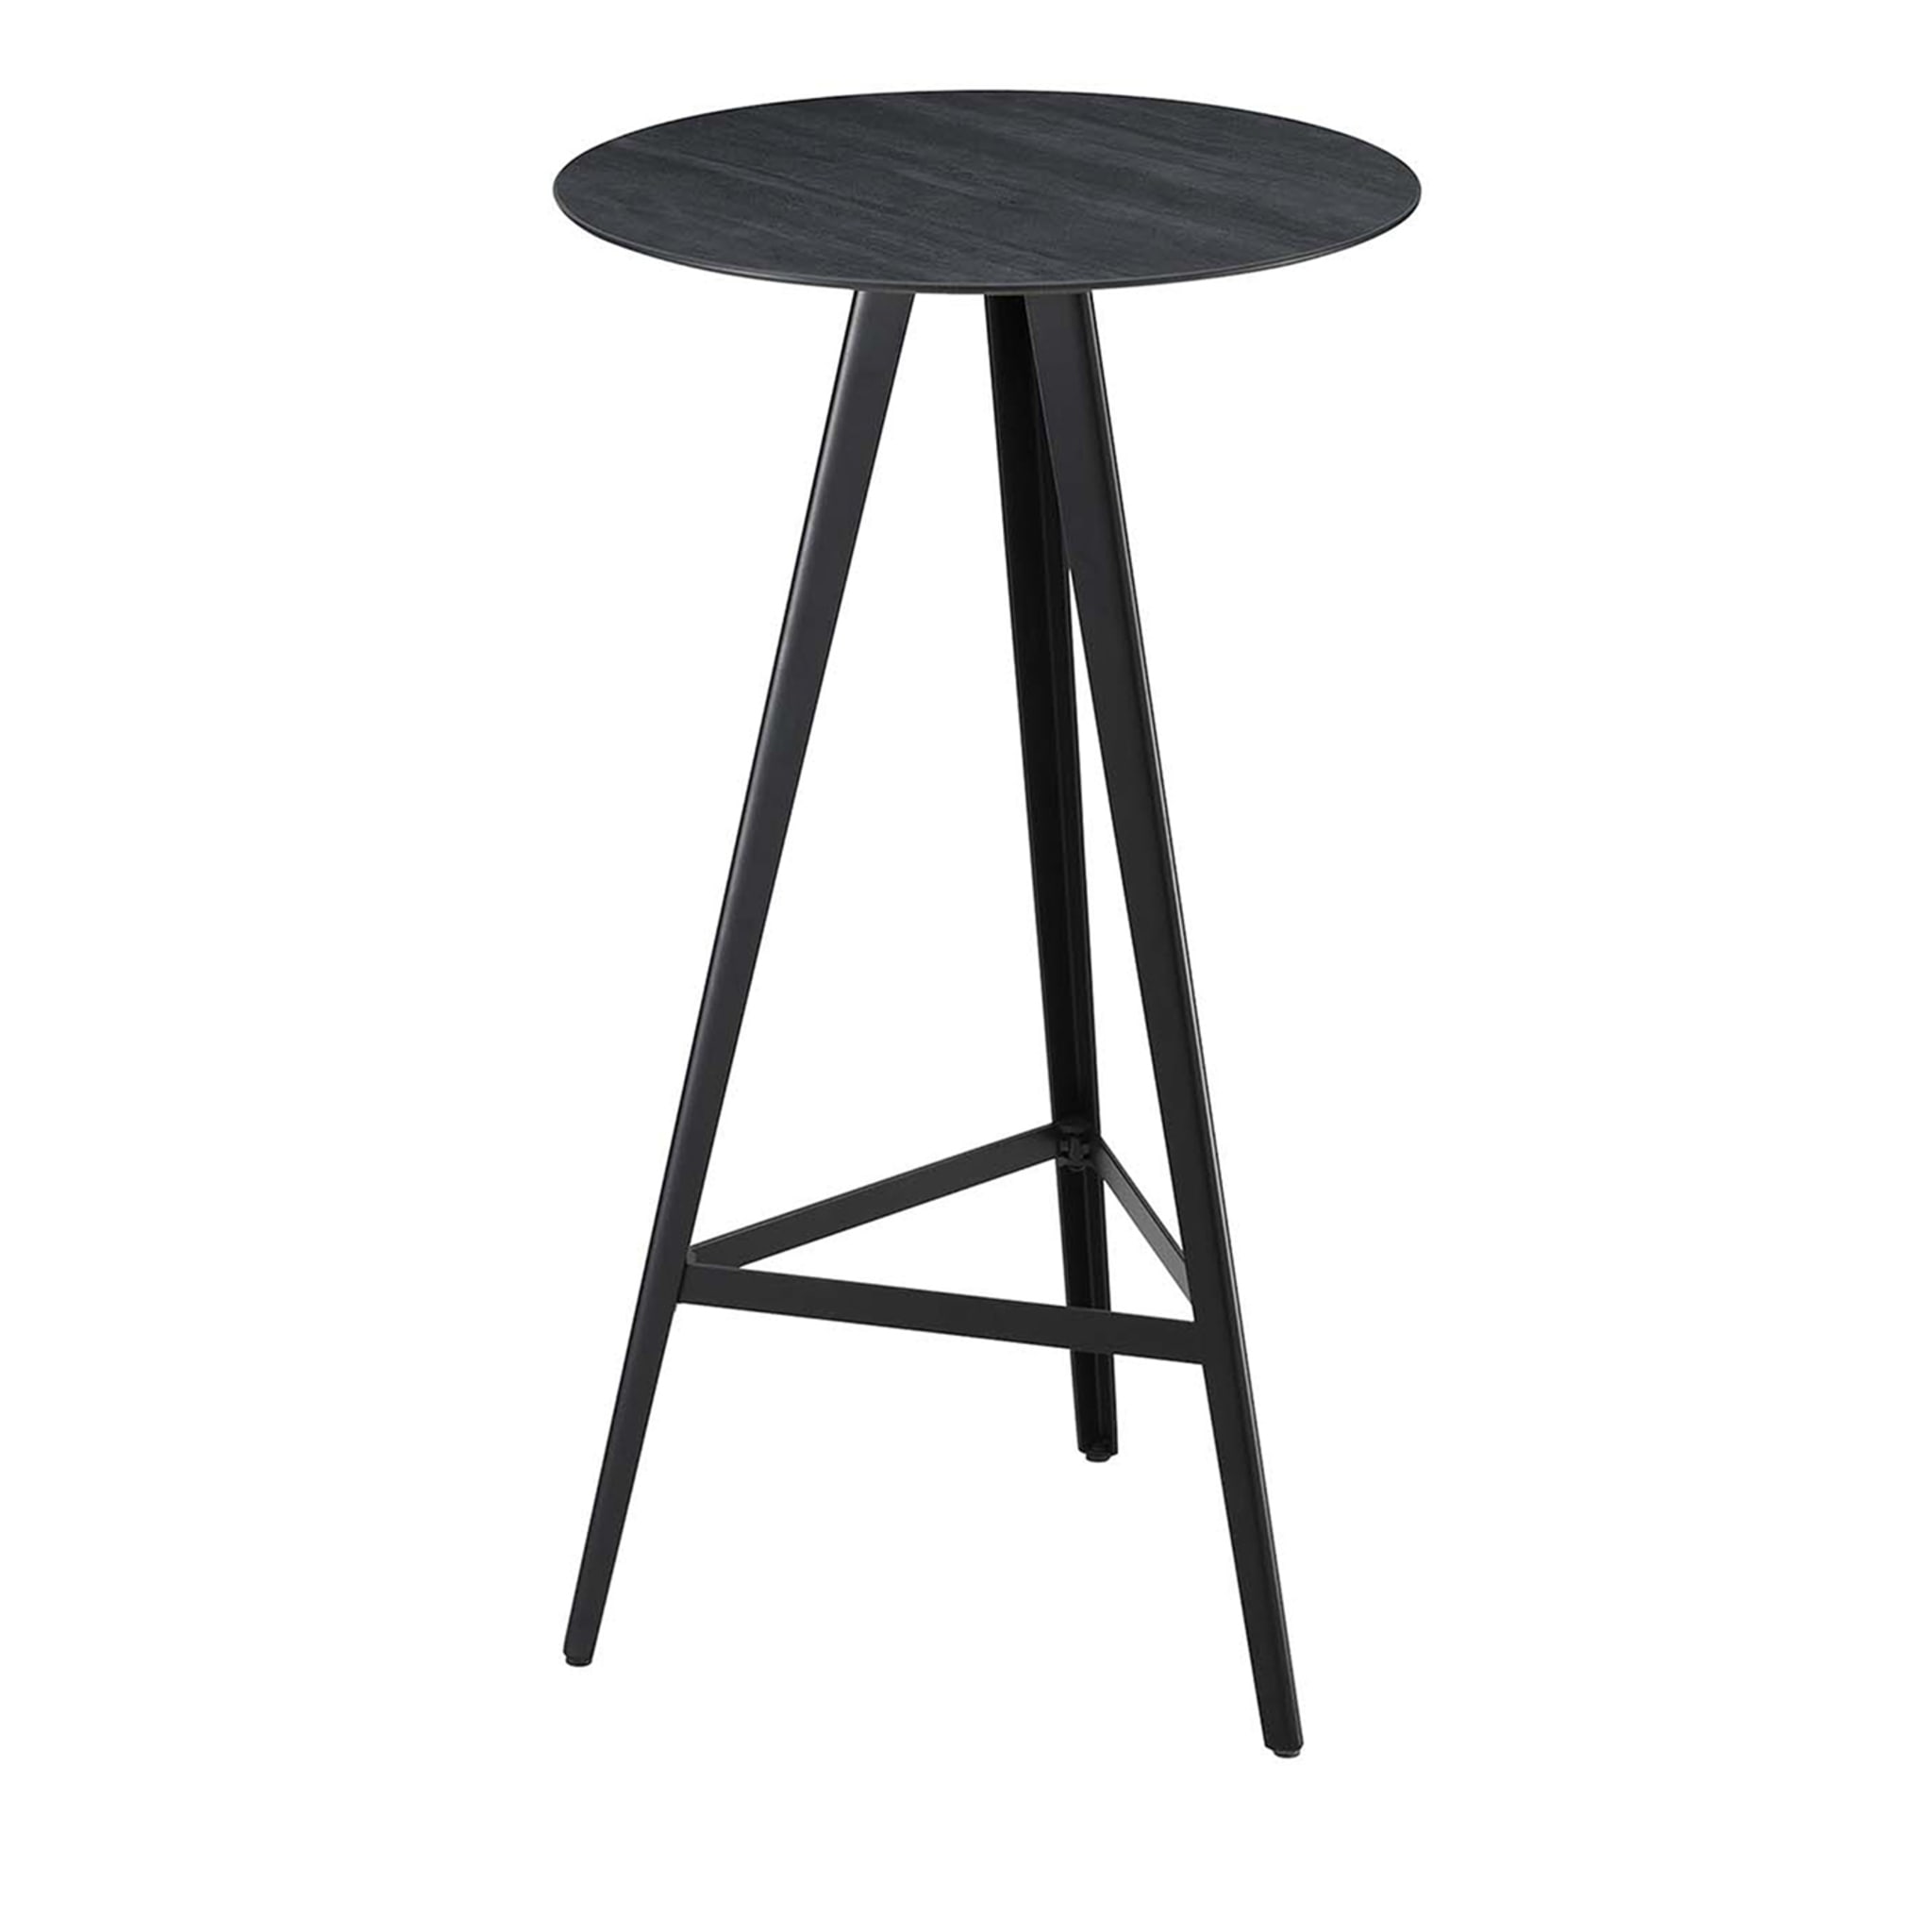 Aky Tall Black Side Table #1 by Emilio Nanni - Main view